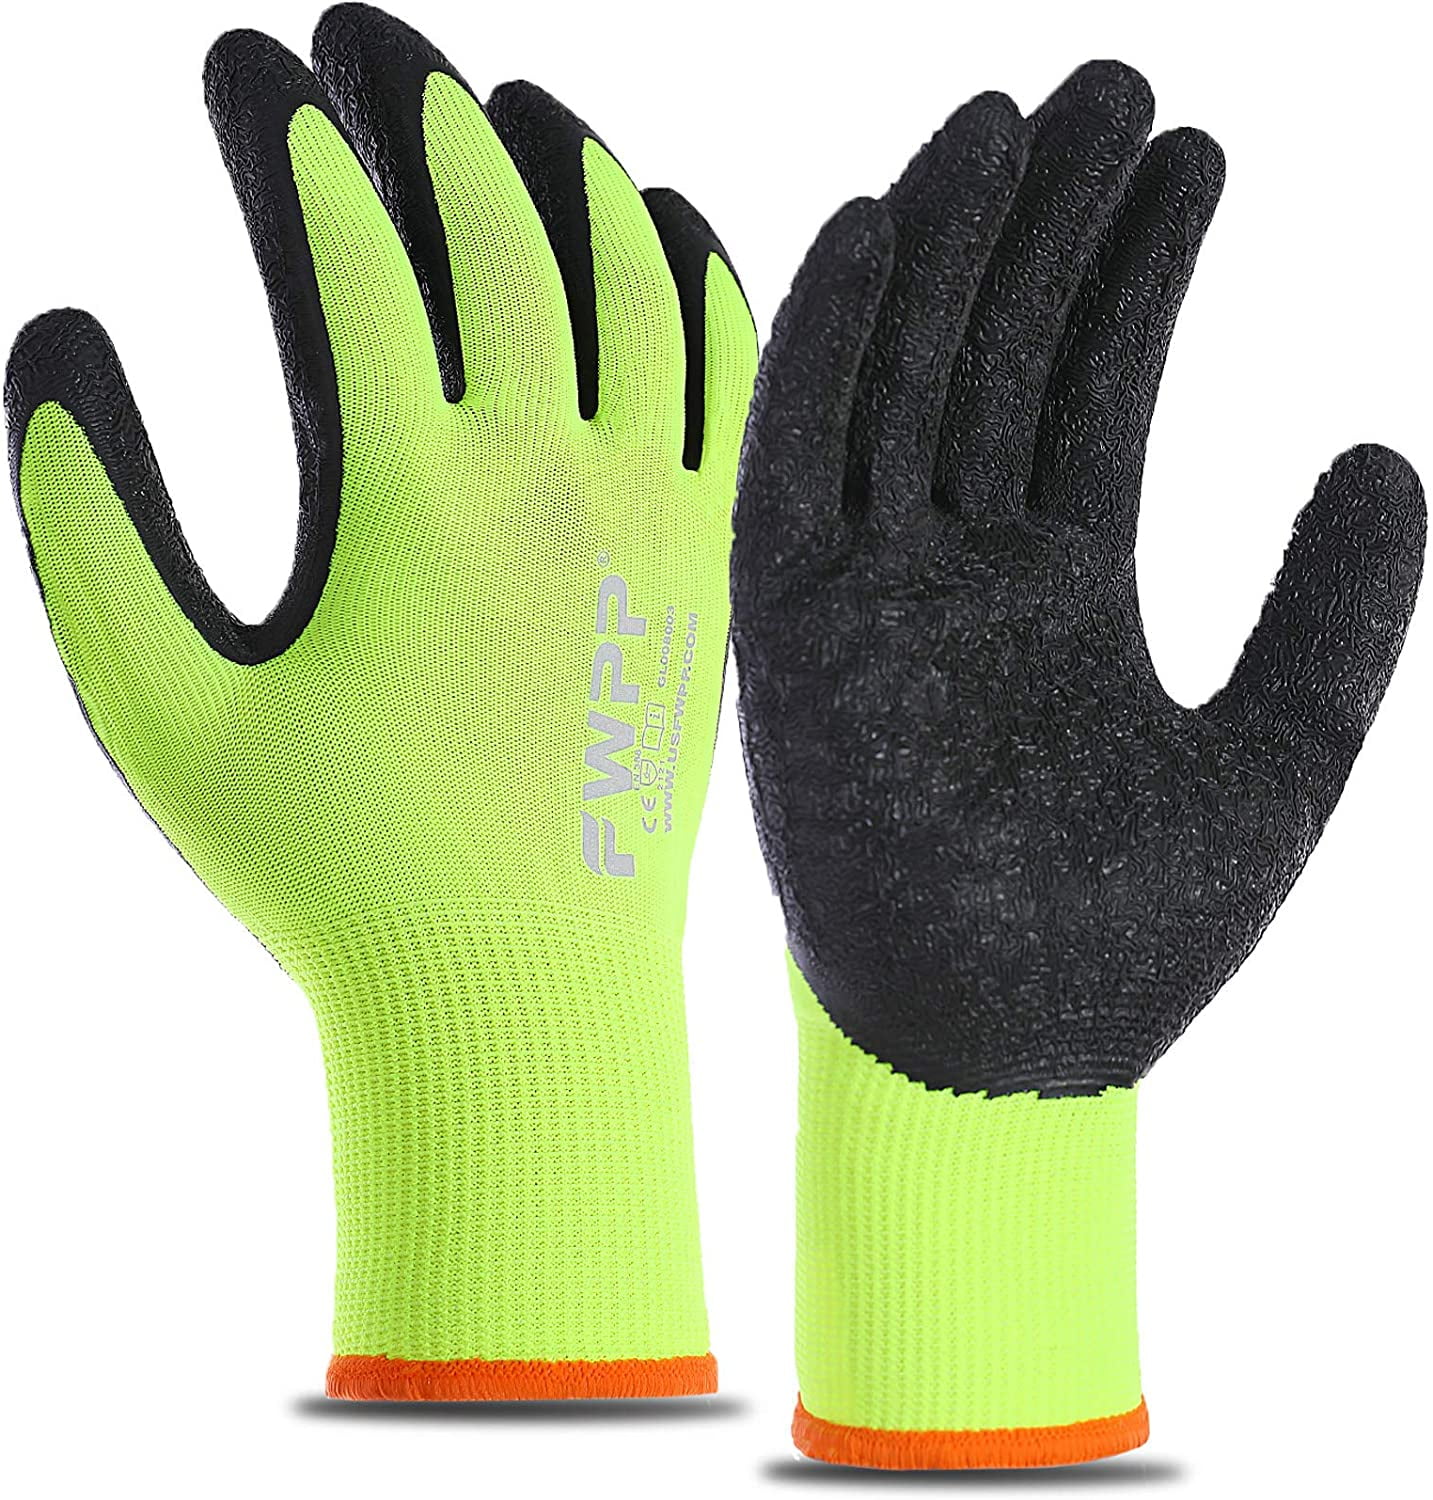 4 Pairs UNISEX Garden GLOVES General Working Easy Grip Rubber Strong Green Mens 